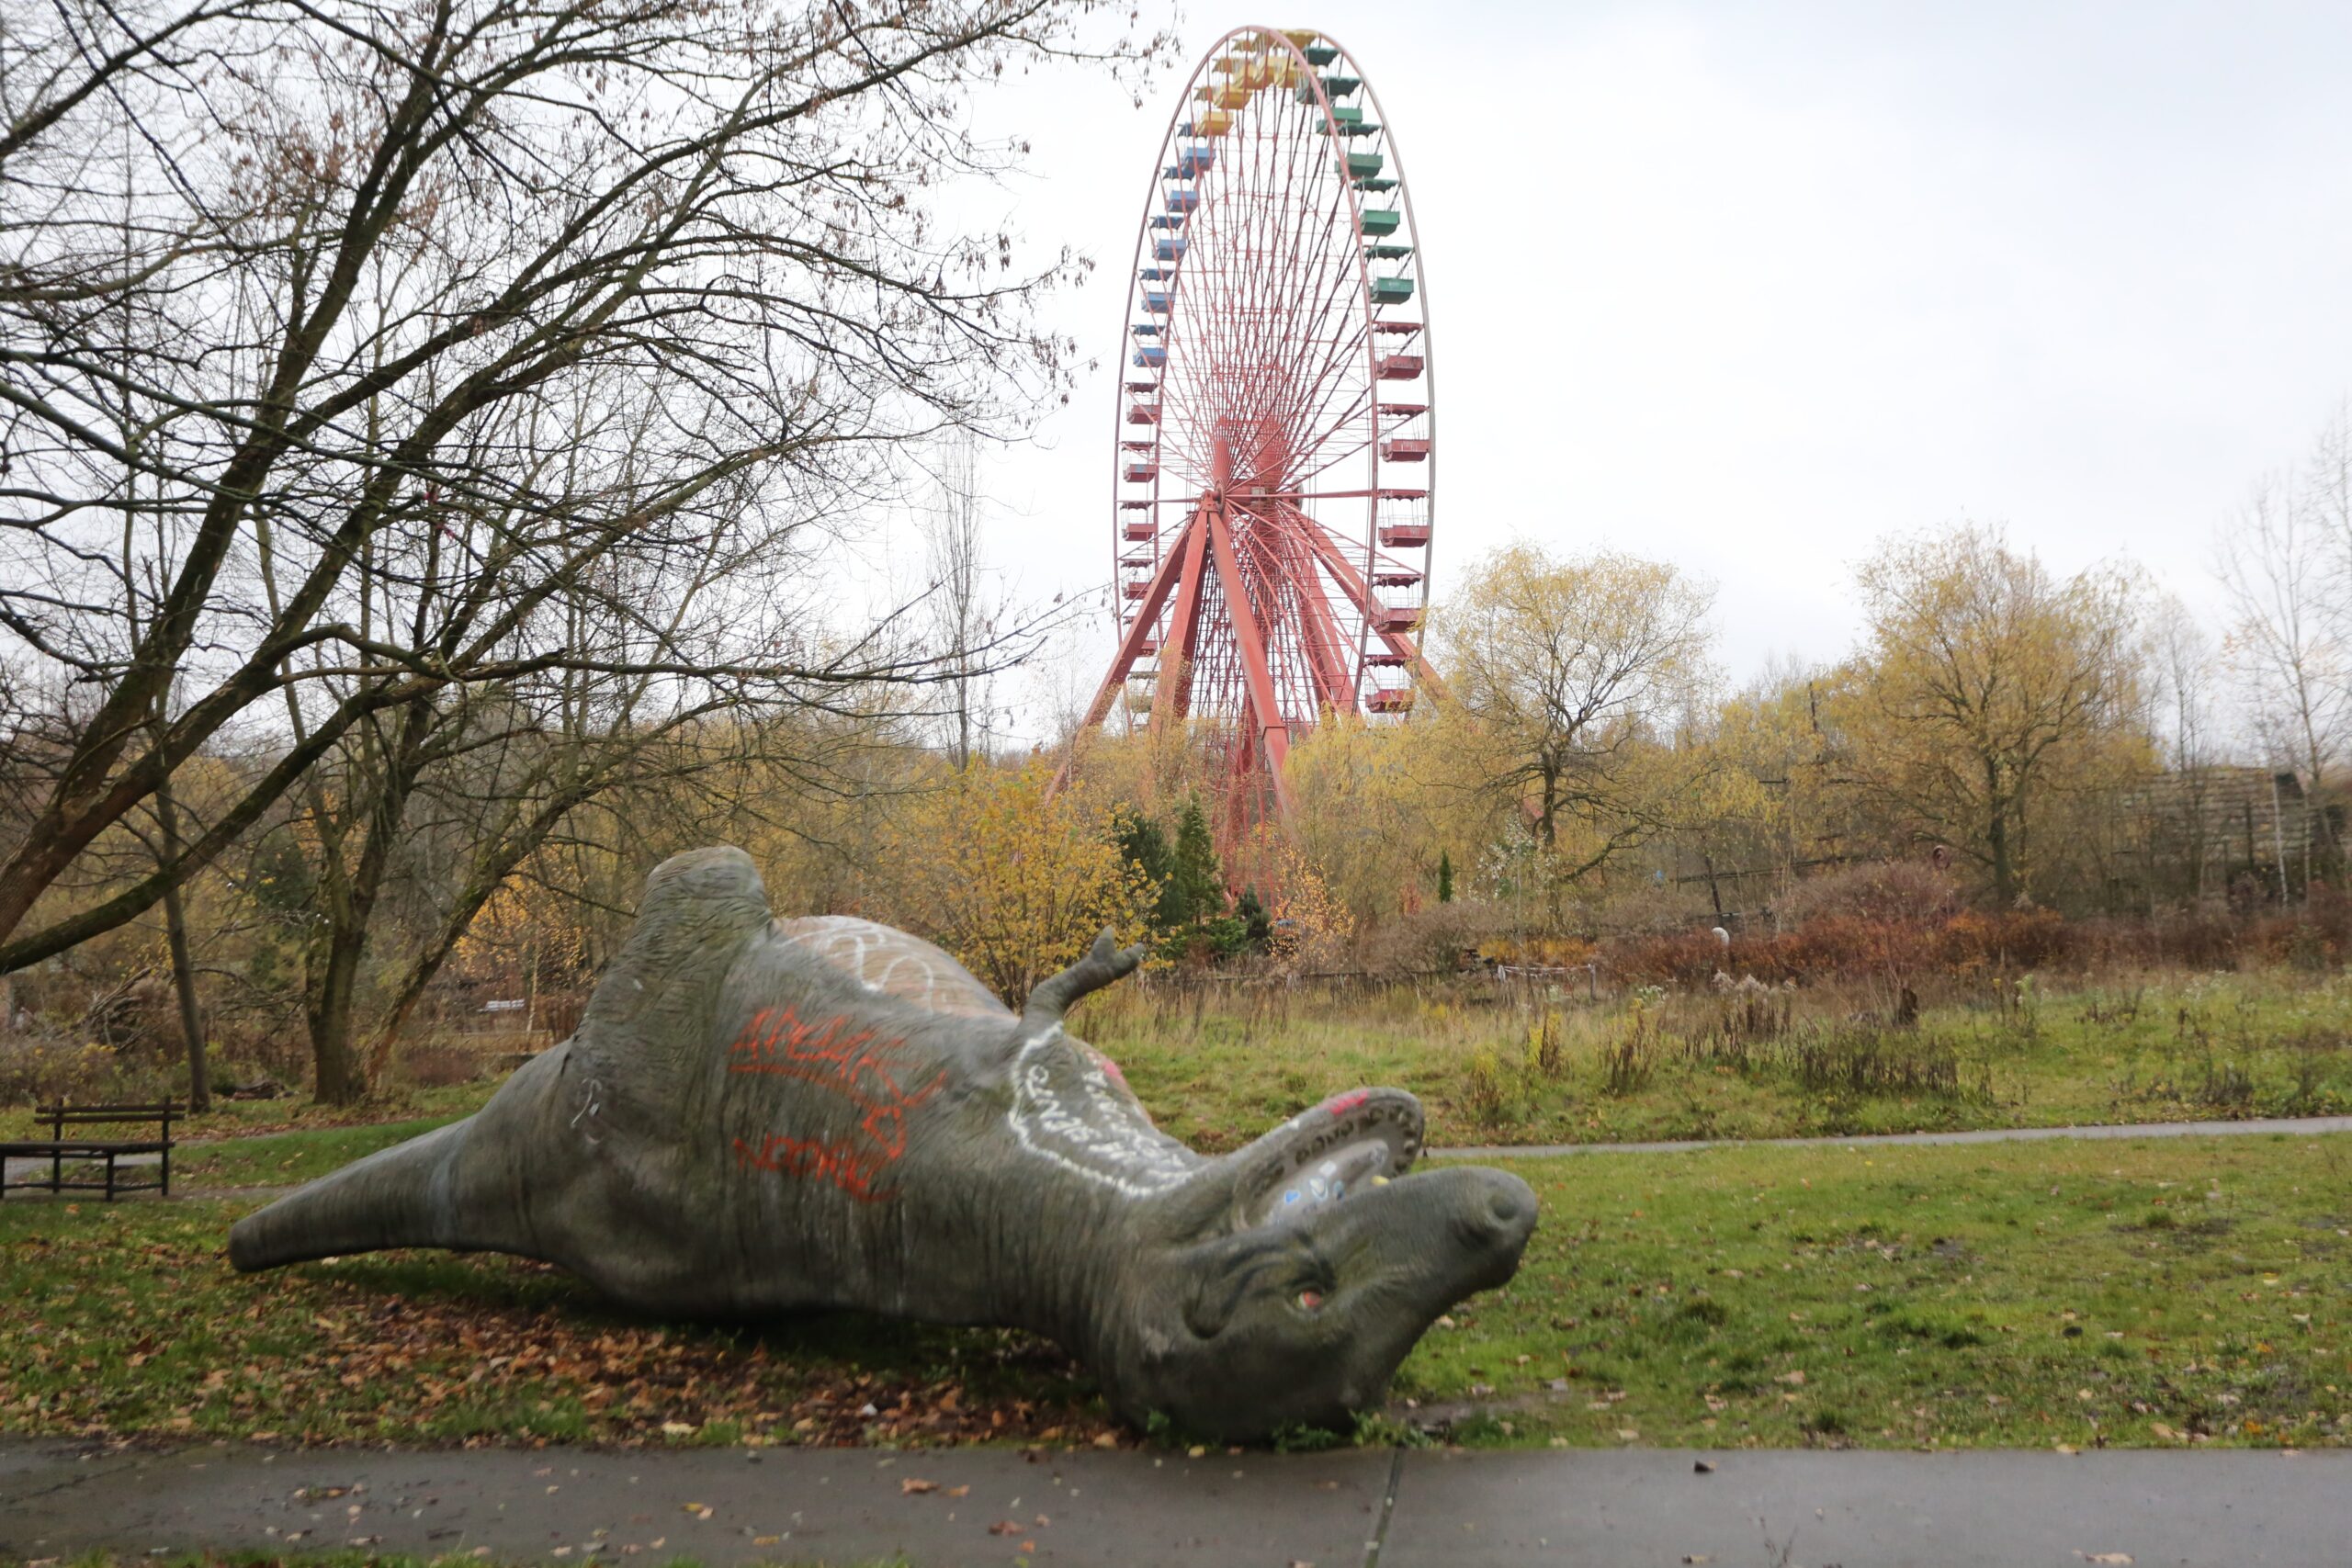 At Spreepark you'll find dinosaurs and a ferris wheel